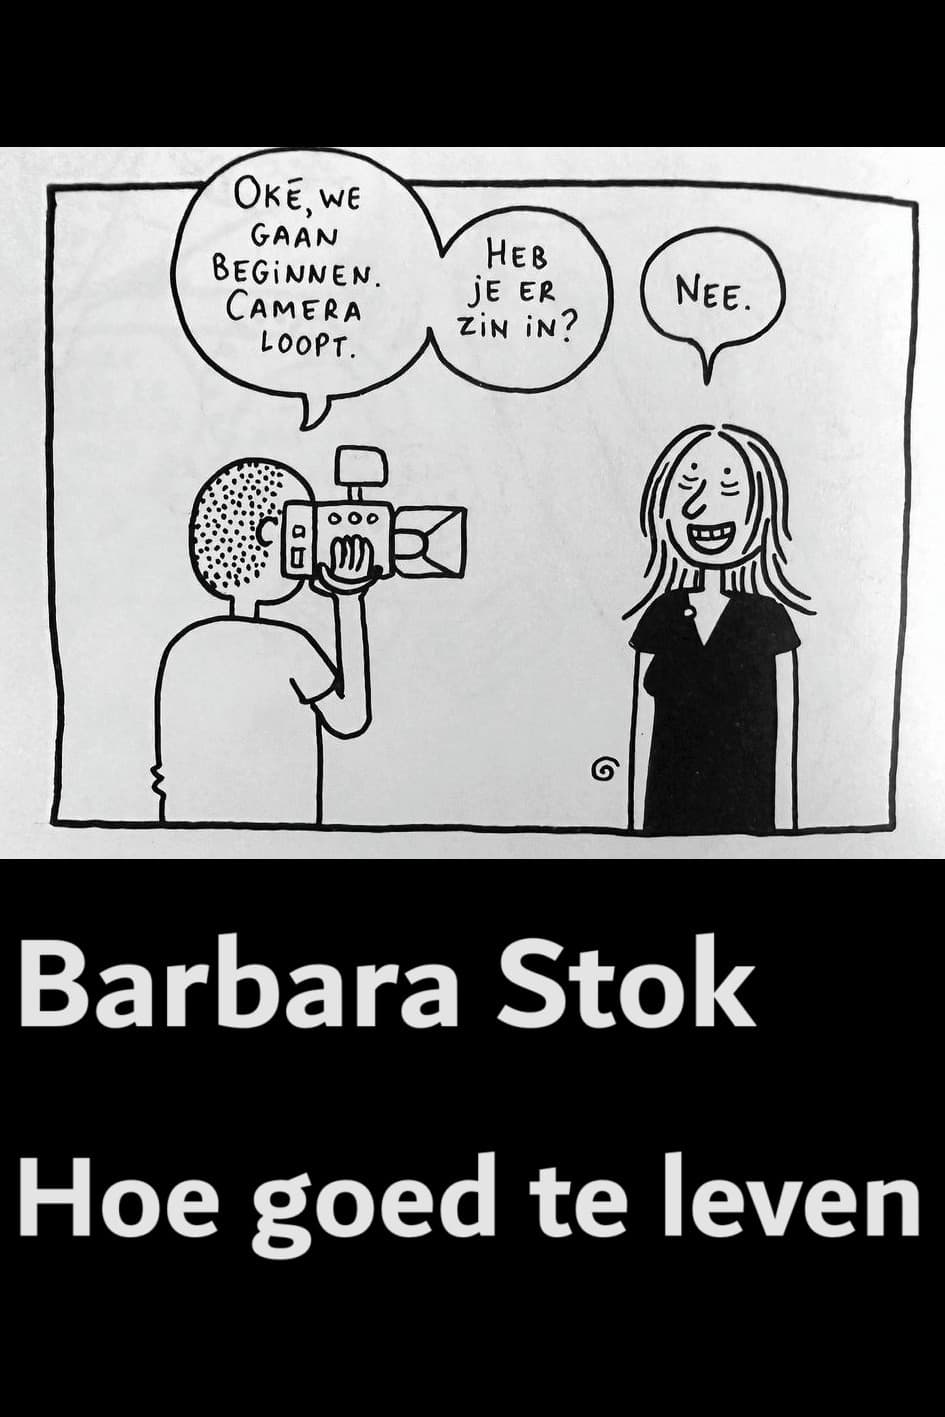 Barbara Stok - How to live well